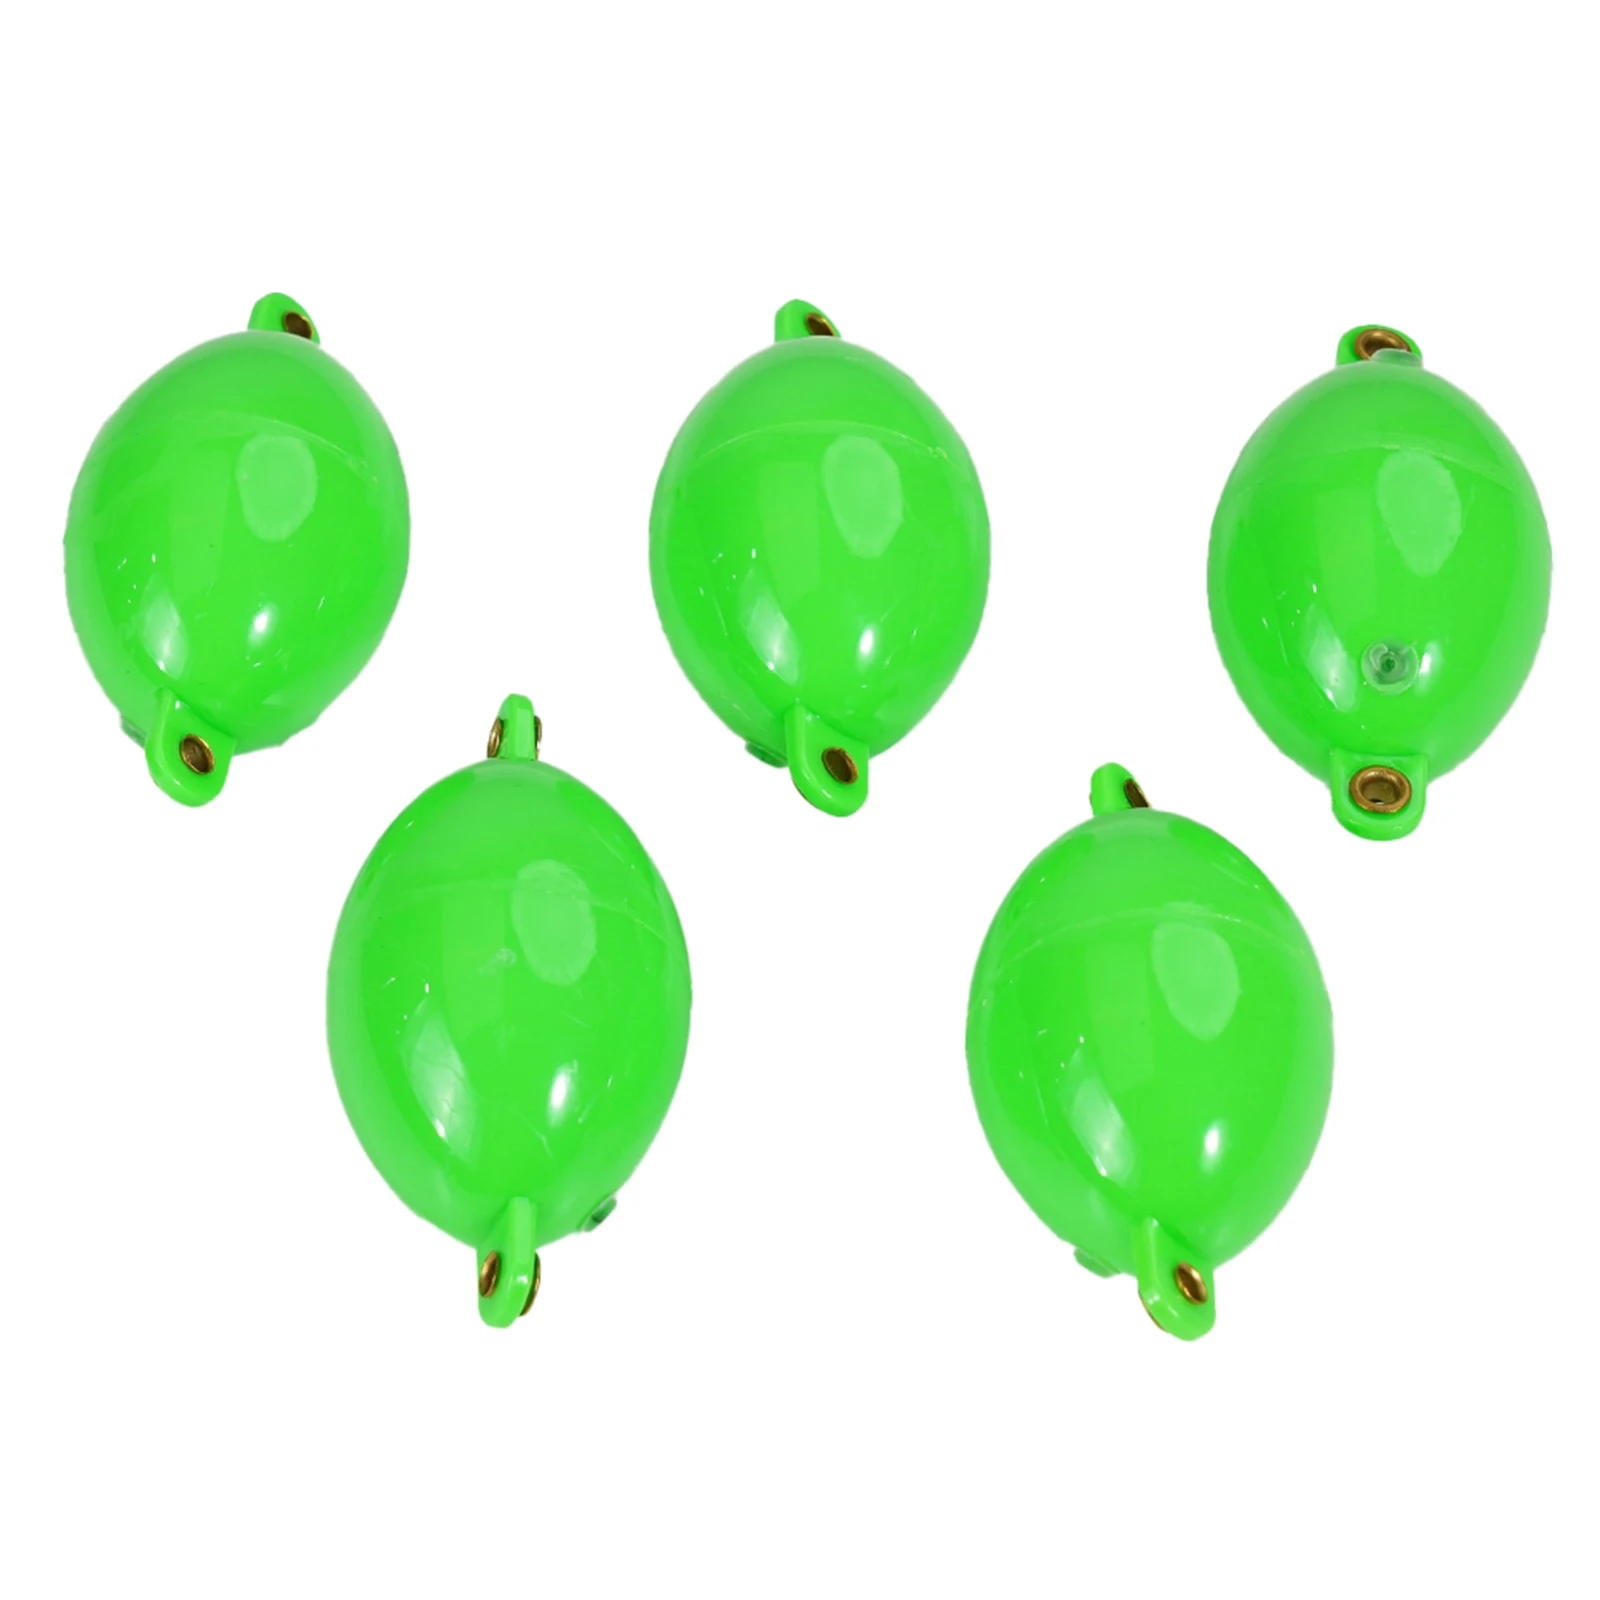 5 Pcs PVC Fishing Float Sea Carp Coarse Surface Water Floats Bubble Big Belly Seven Star Float Ball Outdoor Fishing Accessories enlarge